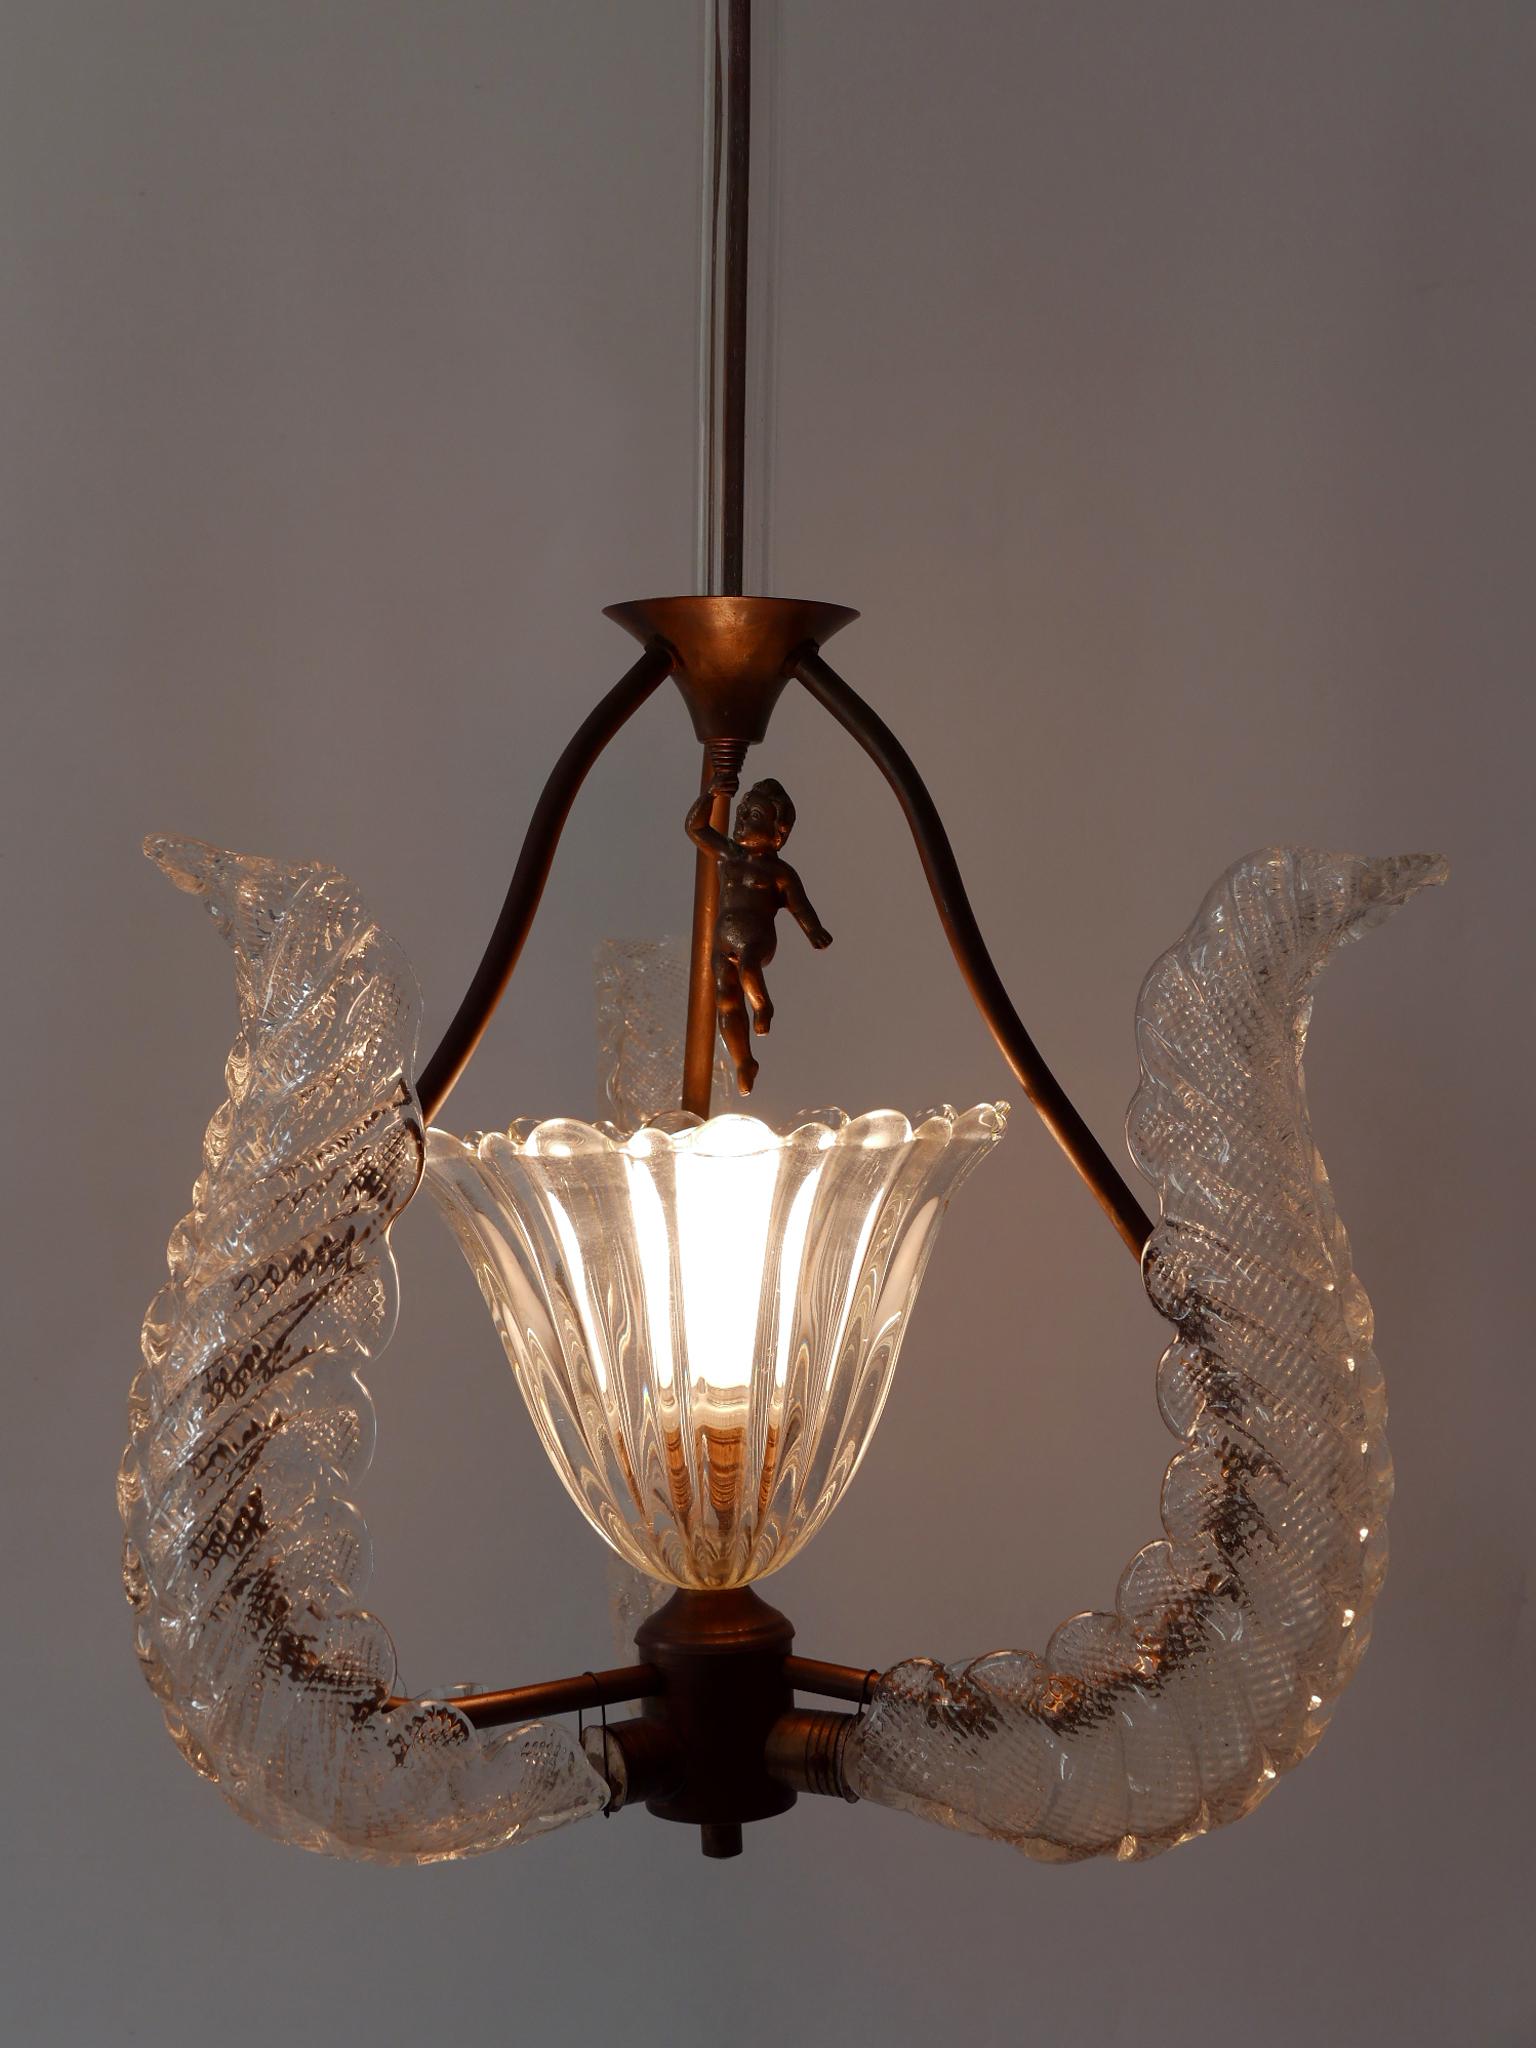 Rare Mid Century Modern Chandelier or Pendant Lamp 'Putti' by Barovier & Toso For Sale 3